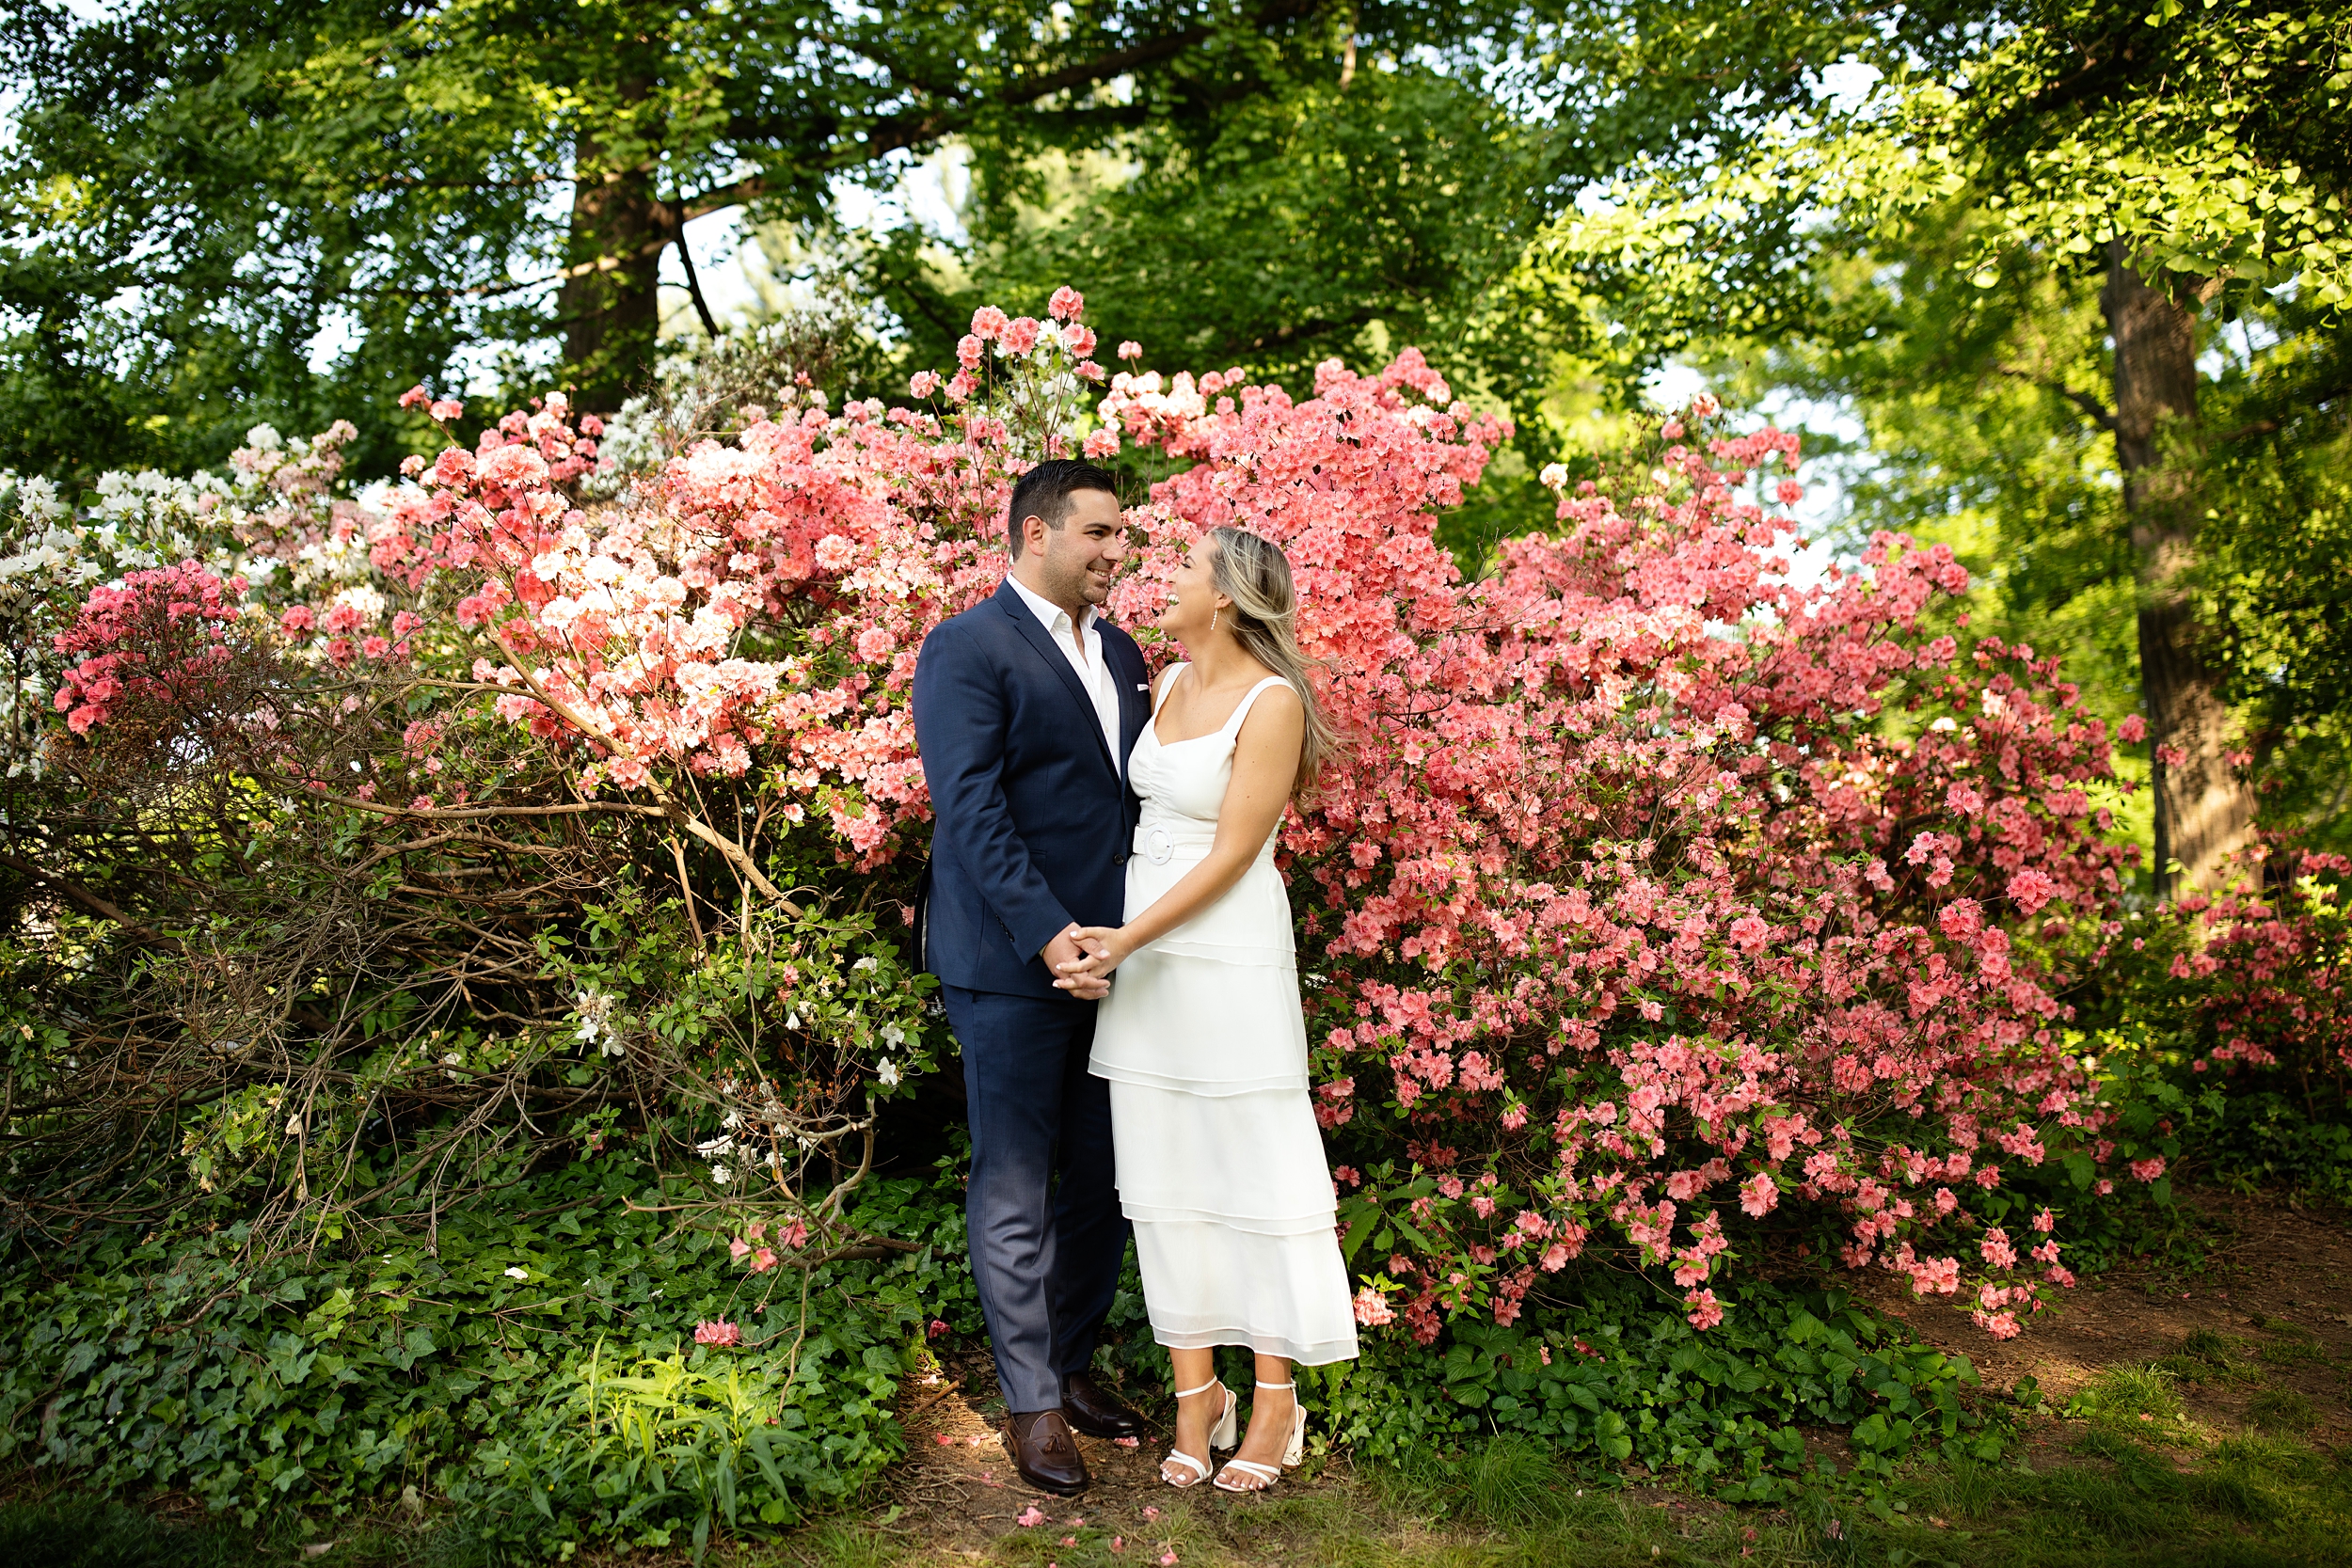 Chic Springtime Engagement Photos in Central Park New York City, captured by NYC Wedding and Engagement Photographers